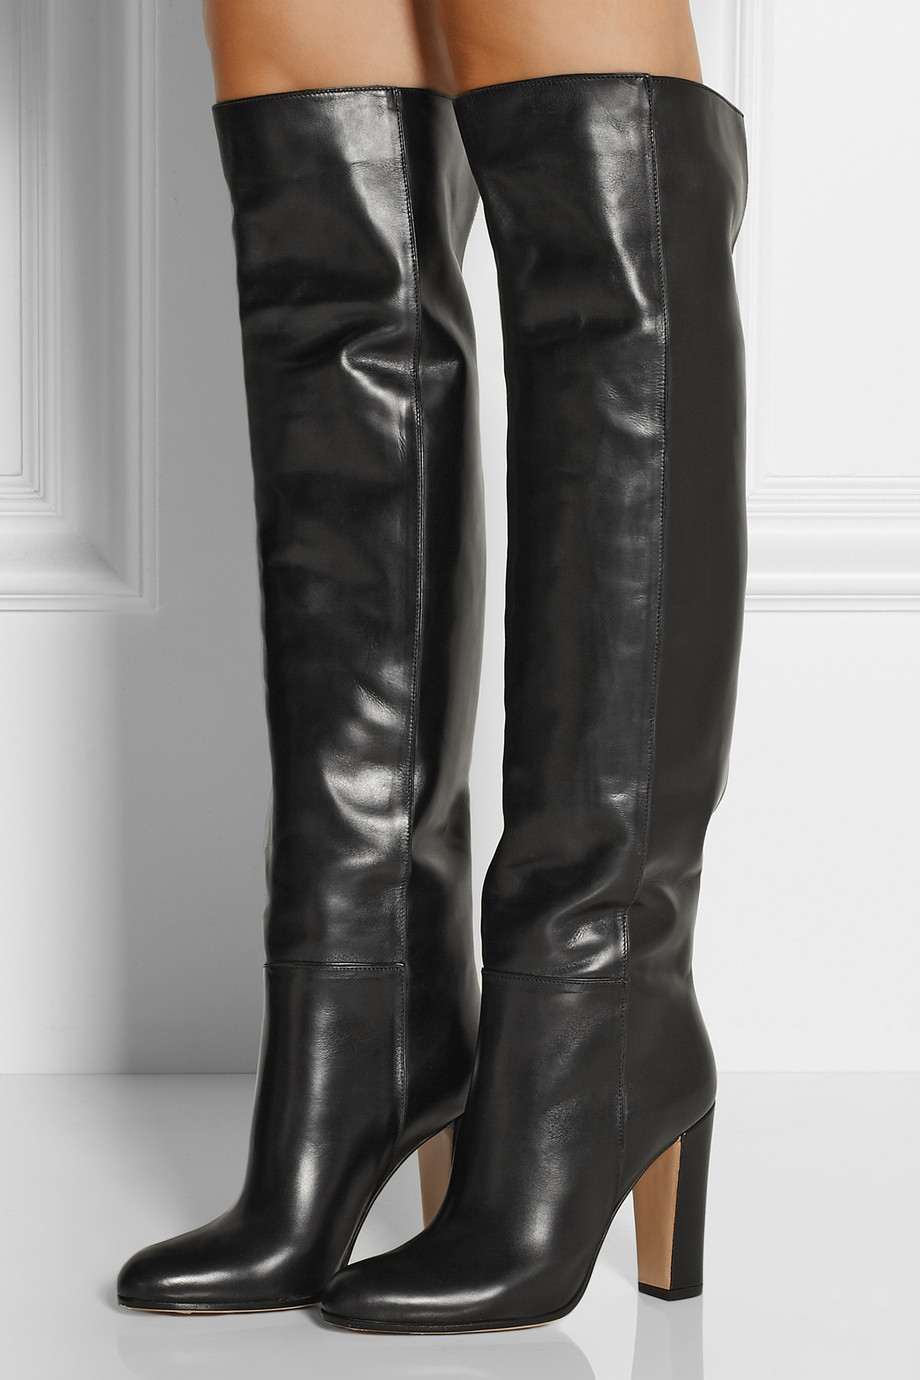 Gianvito Rossi Leather Knee Boots in Black - Lyst